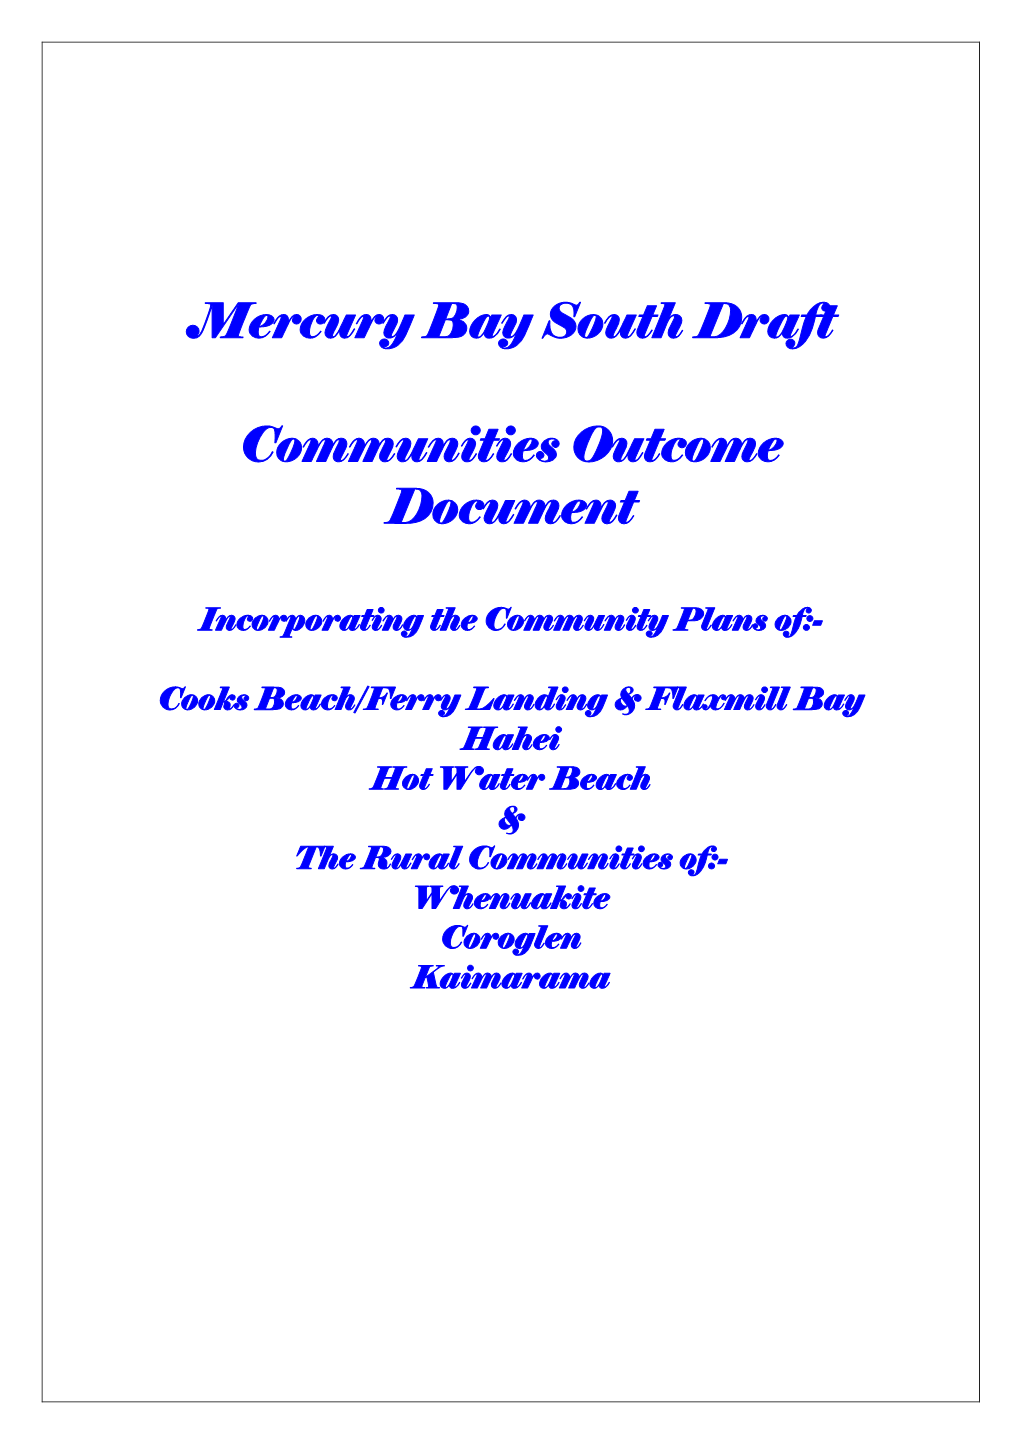 Mercury Bay South Draft Communities Outcome Document